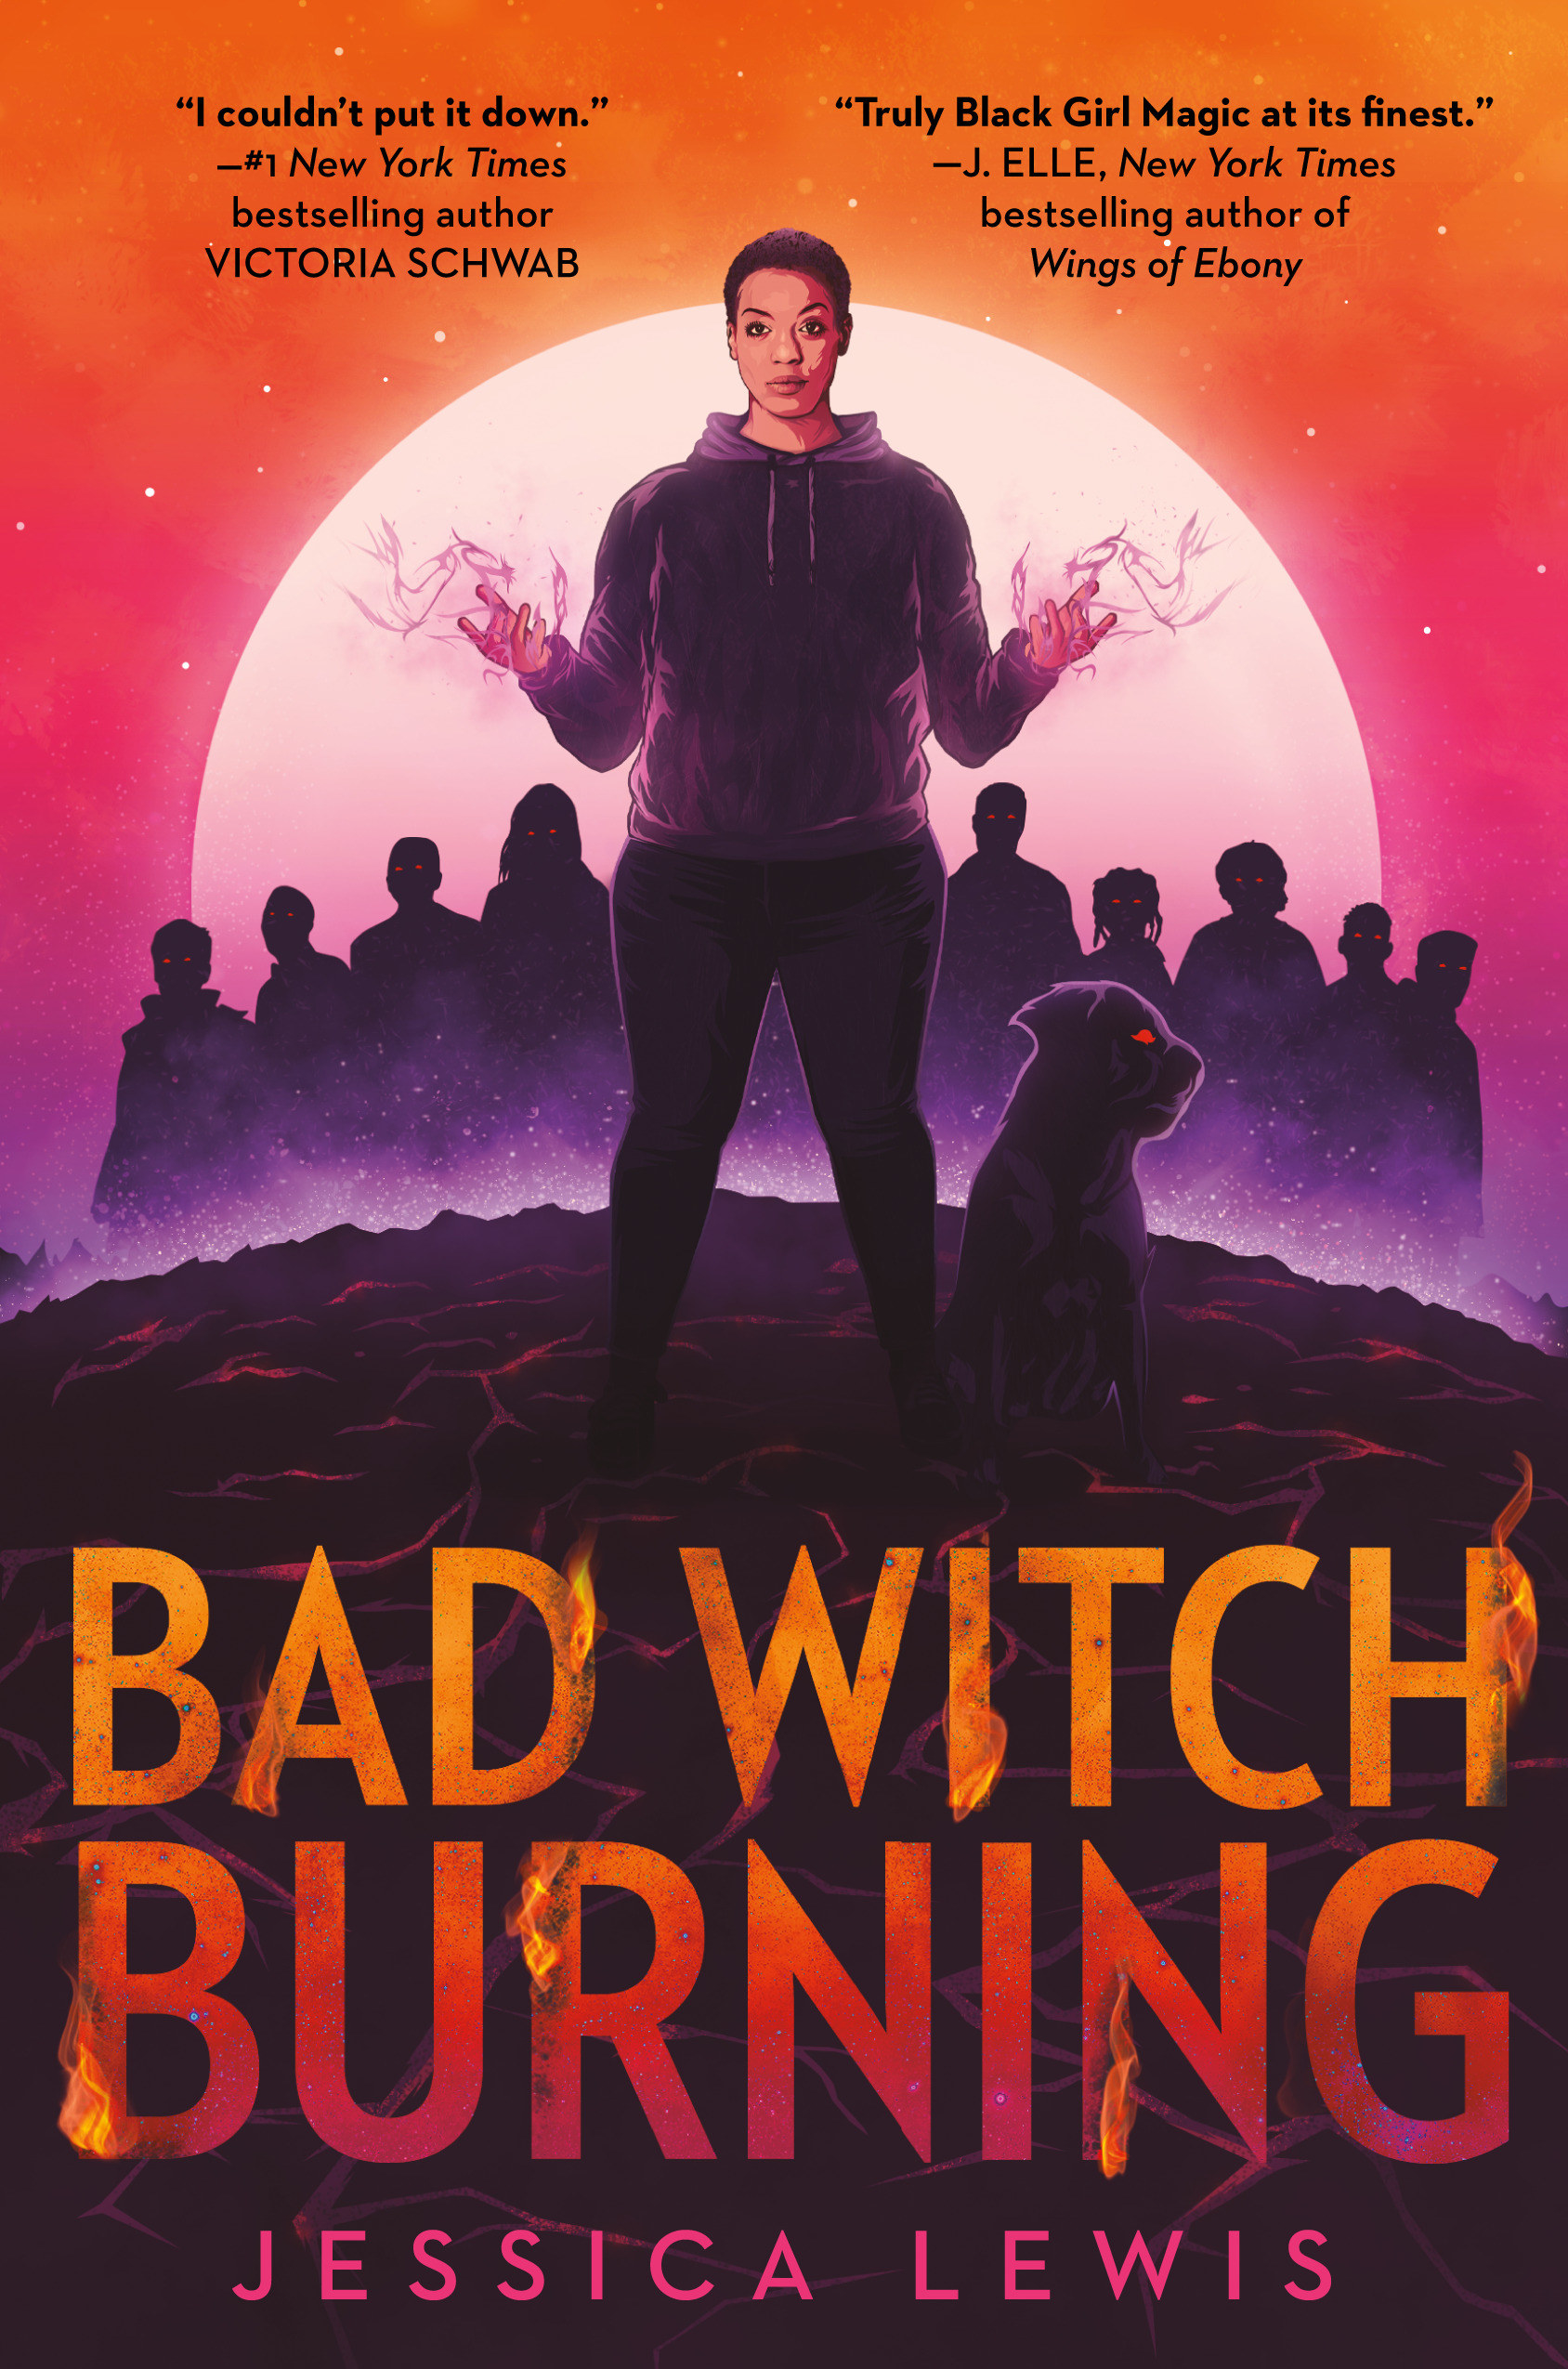 The cover of &quot;Bad Witch Burning,&quot; which shows a magical teenager in front of a full moon.